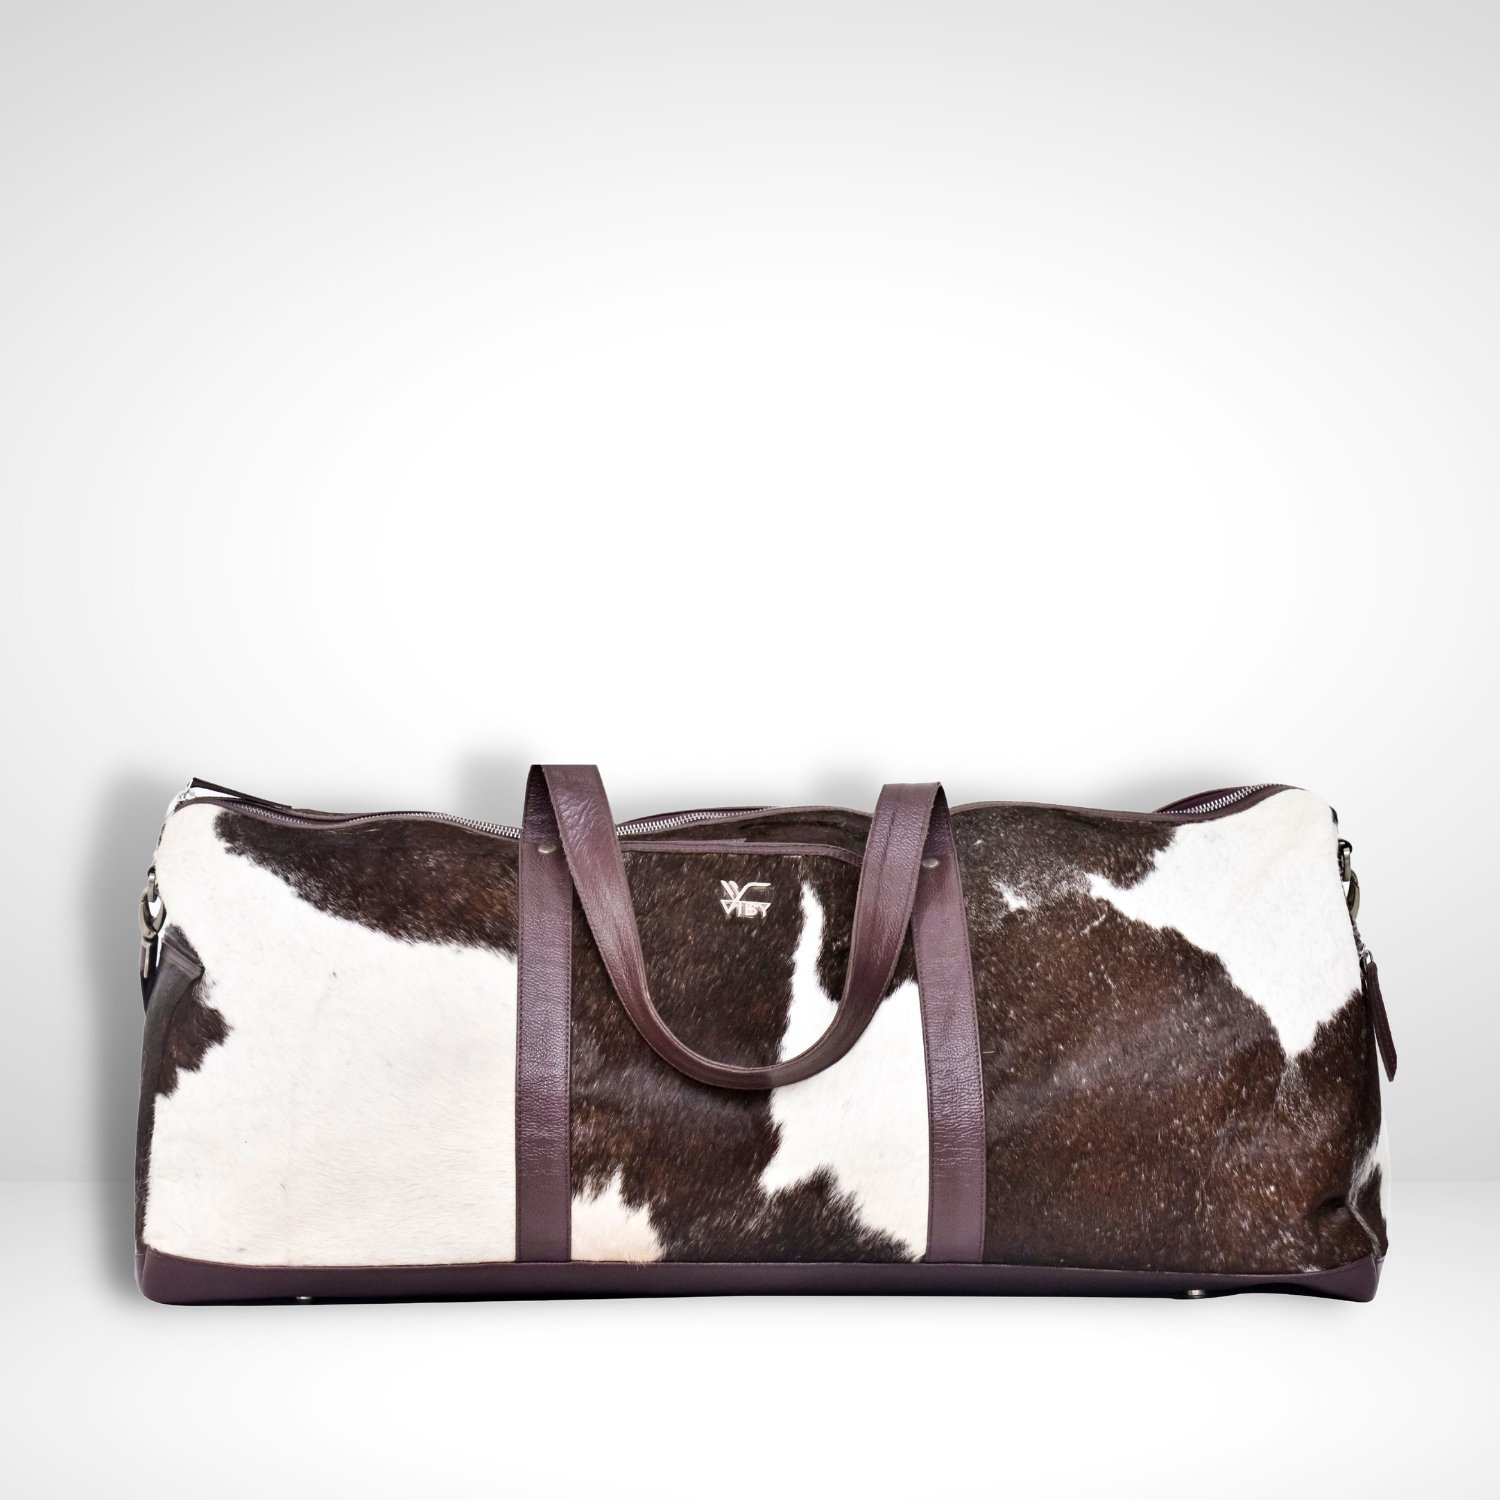 Brown Leather Printed Duffle Bag, For Travel